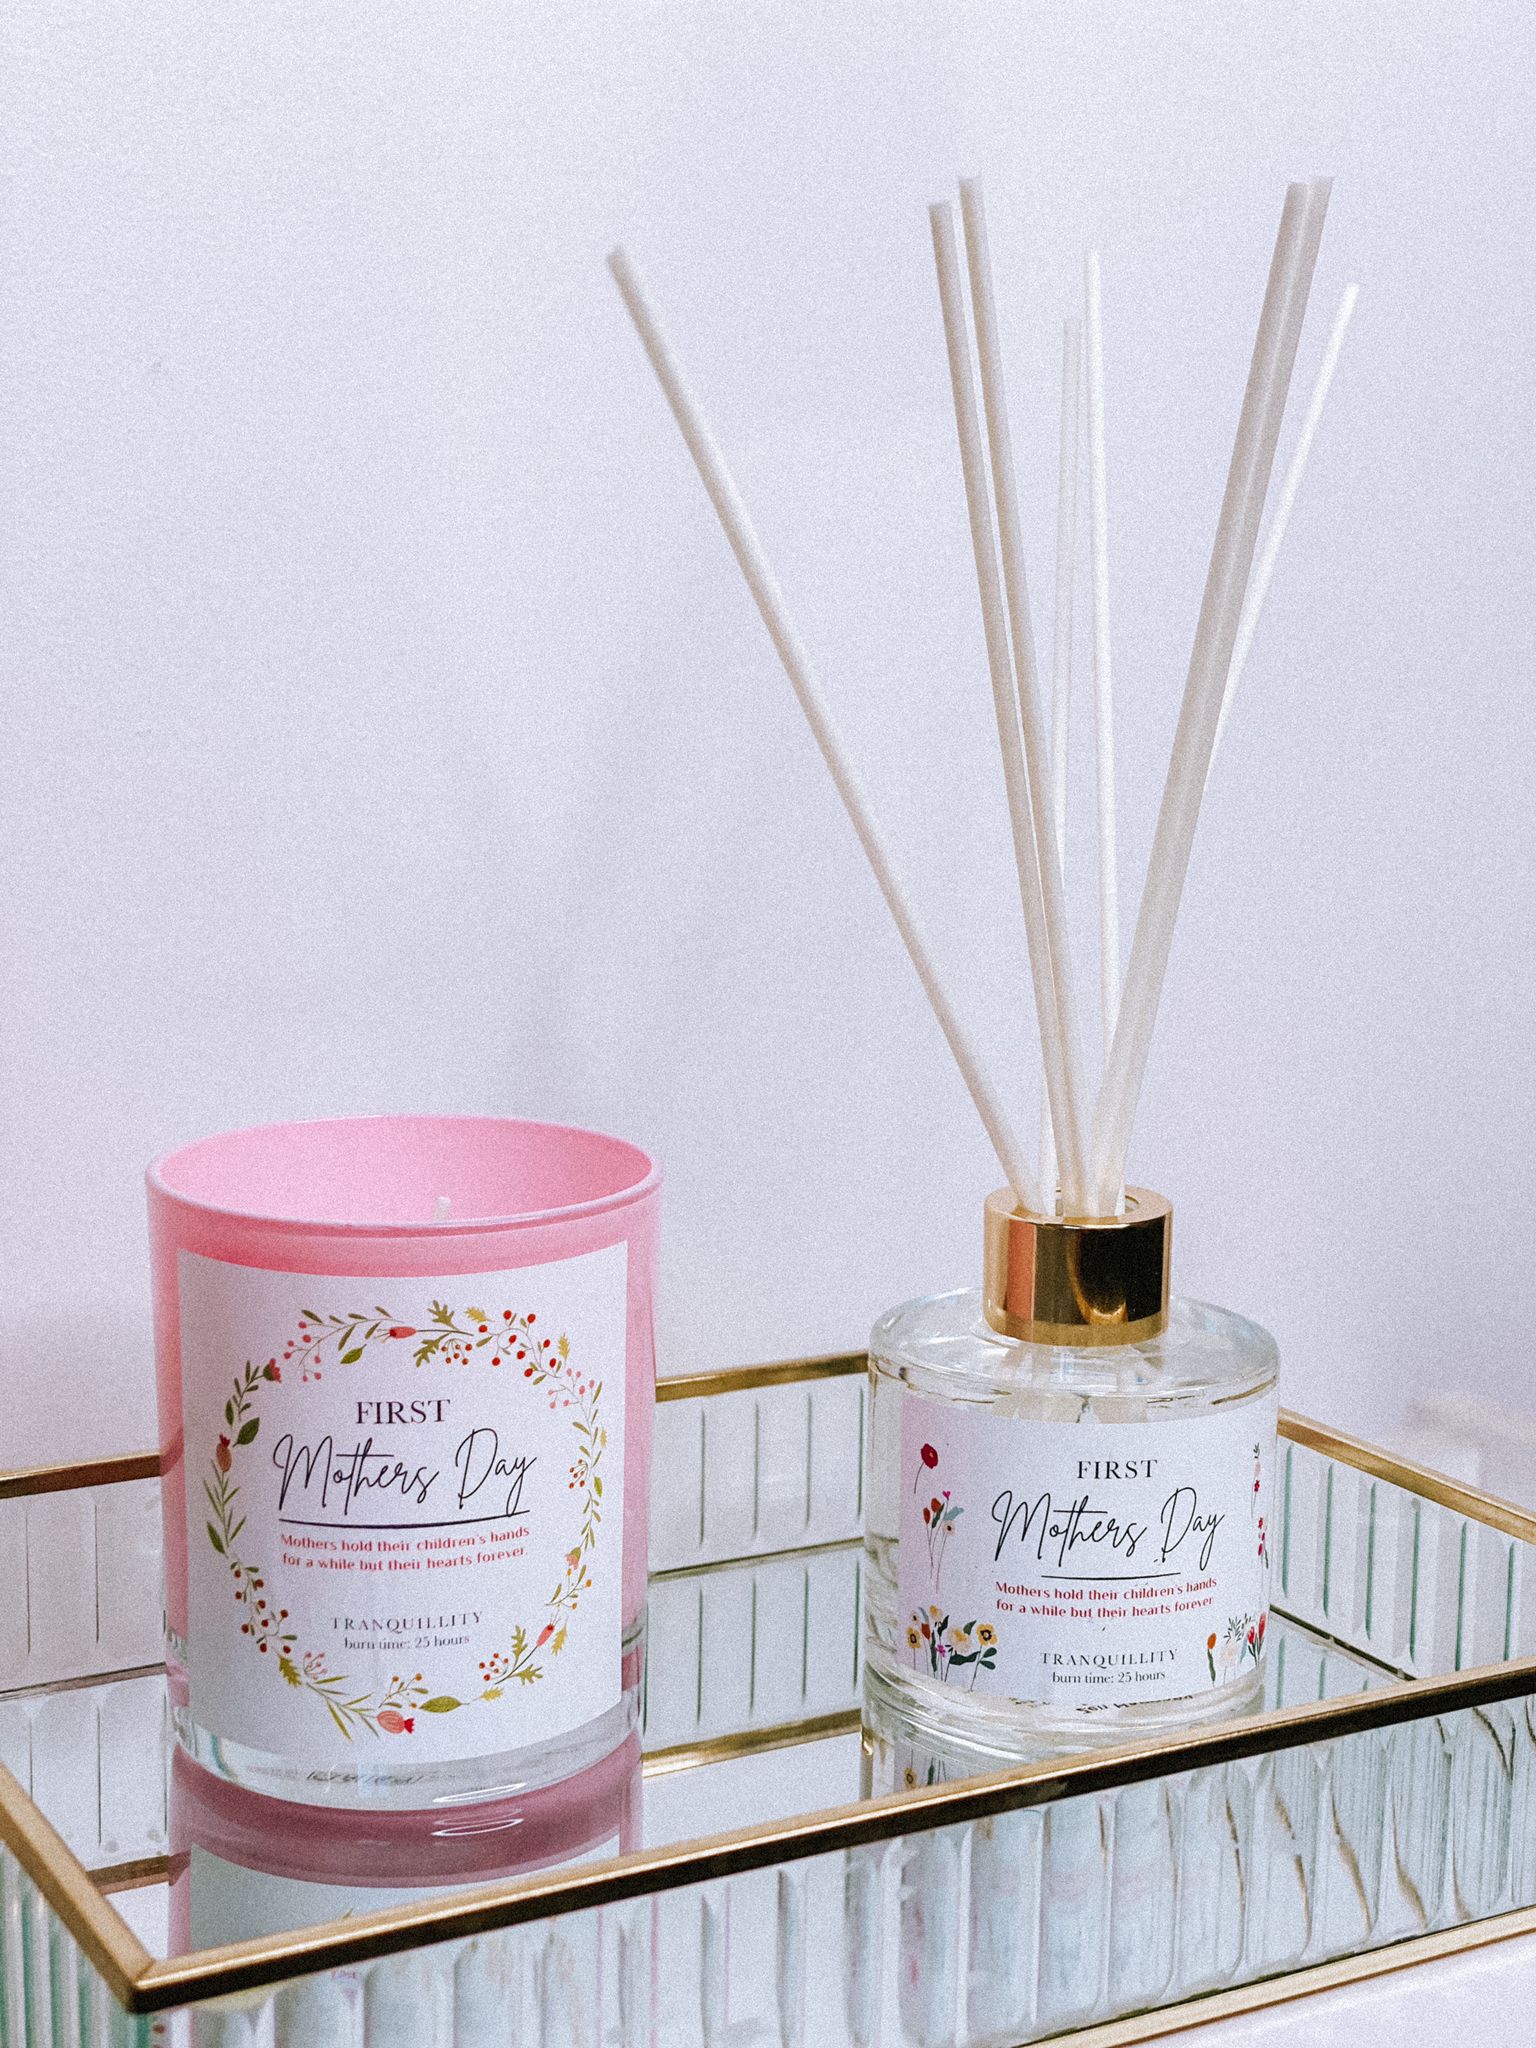 "First Mothers Day" Reed Diffuser